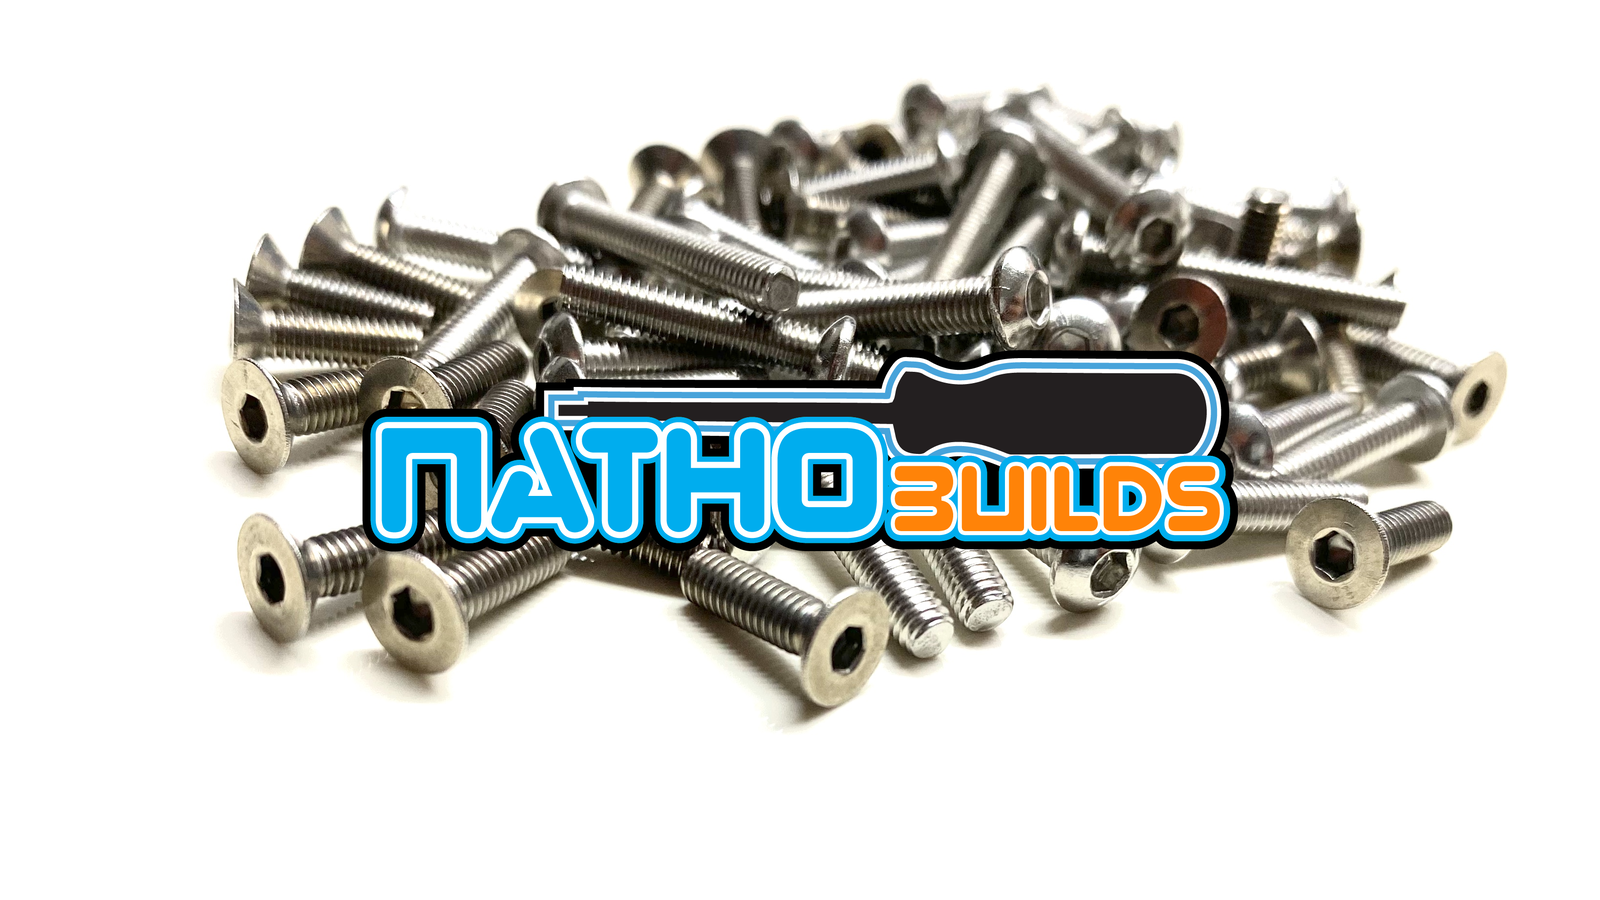 NathoBuilds: Stainless Steel Screw Kits - 2WD - Team Associated T6.1/T6.2